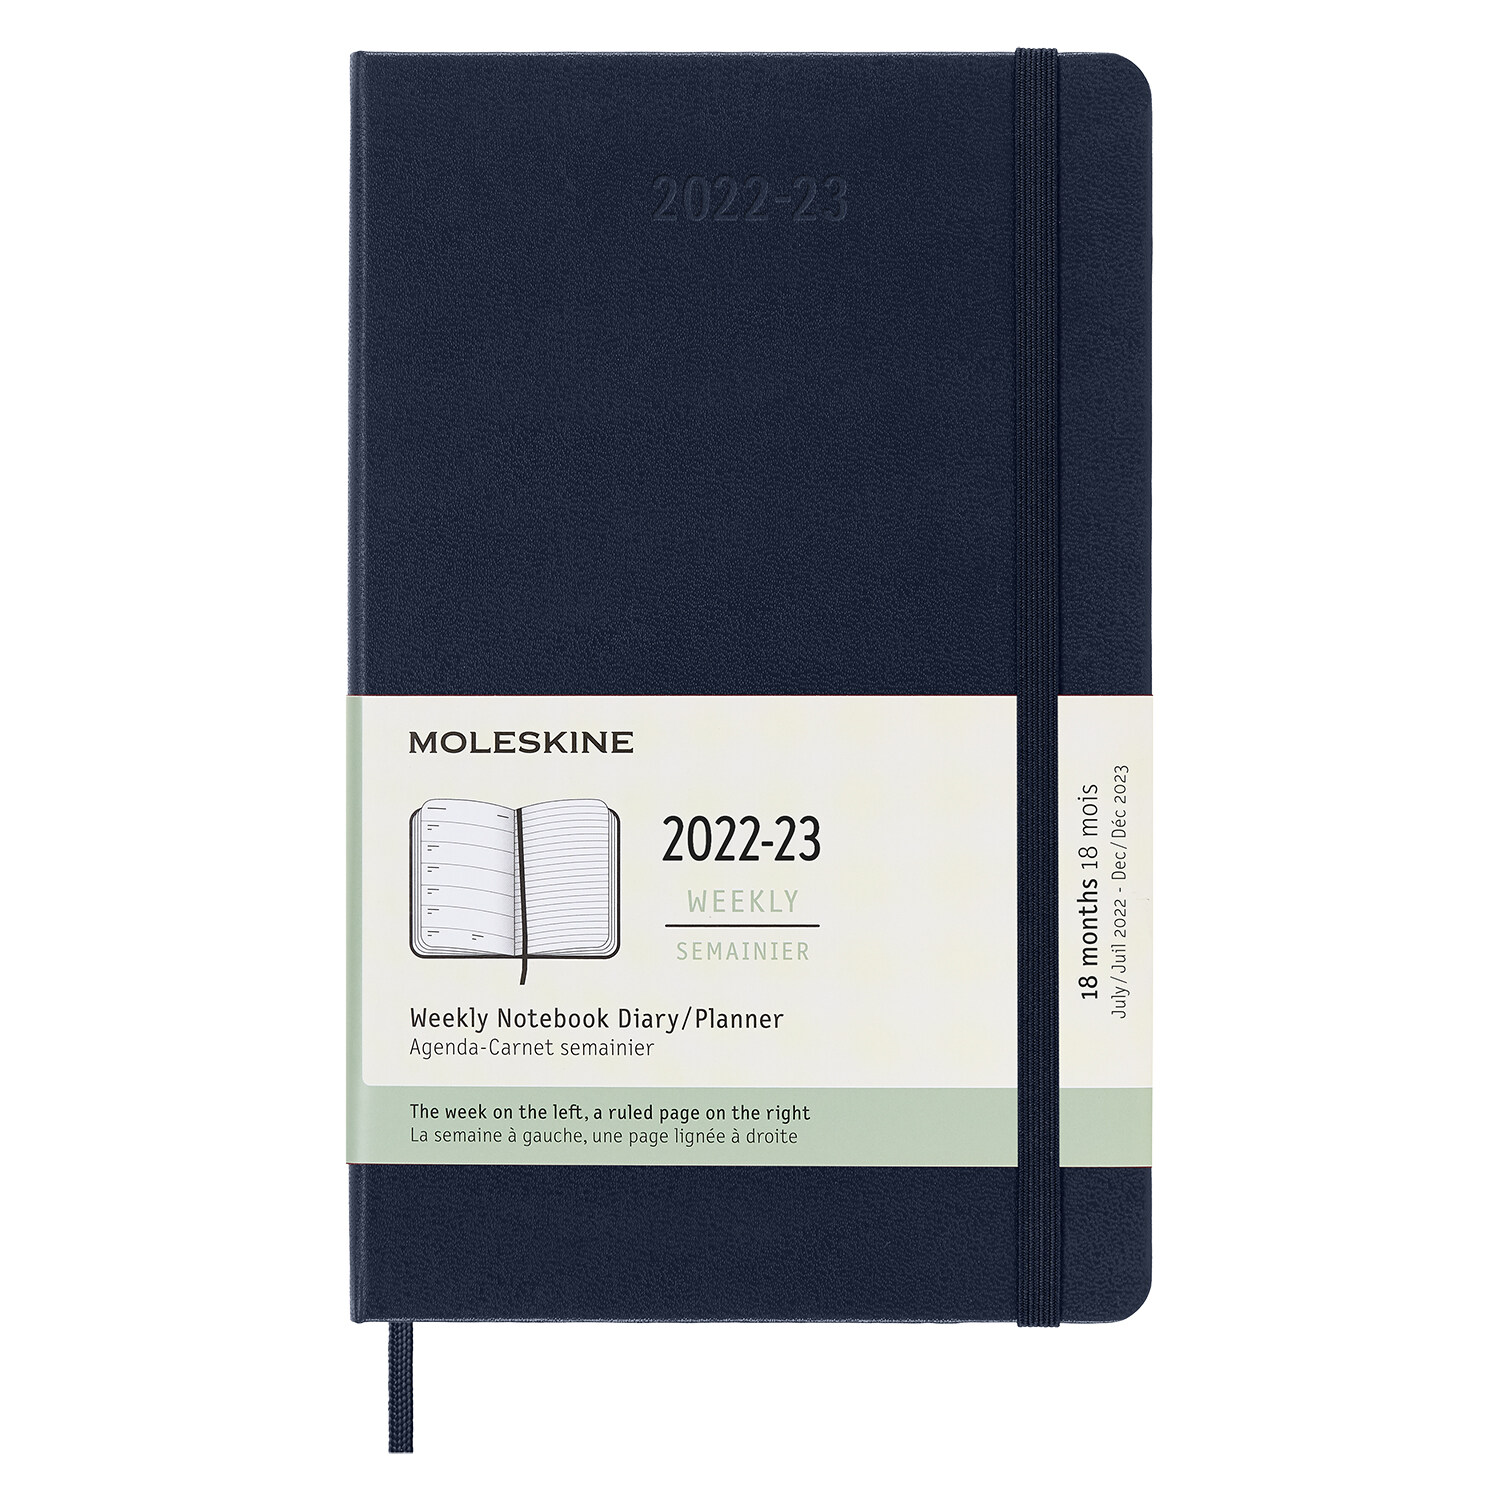 Moleskine 2023 Weekly Notebook Planner, 18m, Large, Saphire Blue, Hard Cover (5 X 8.25) (Other)